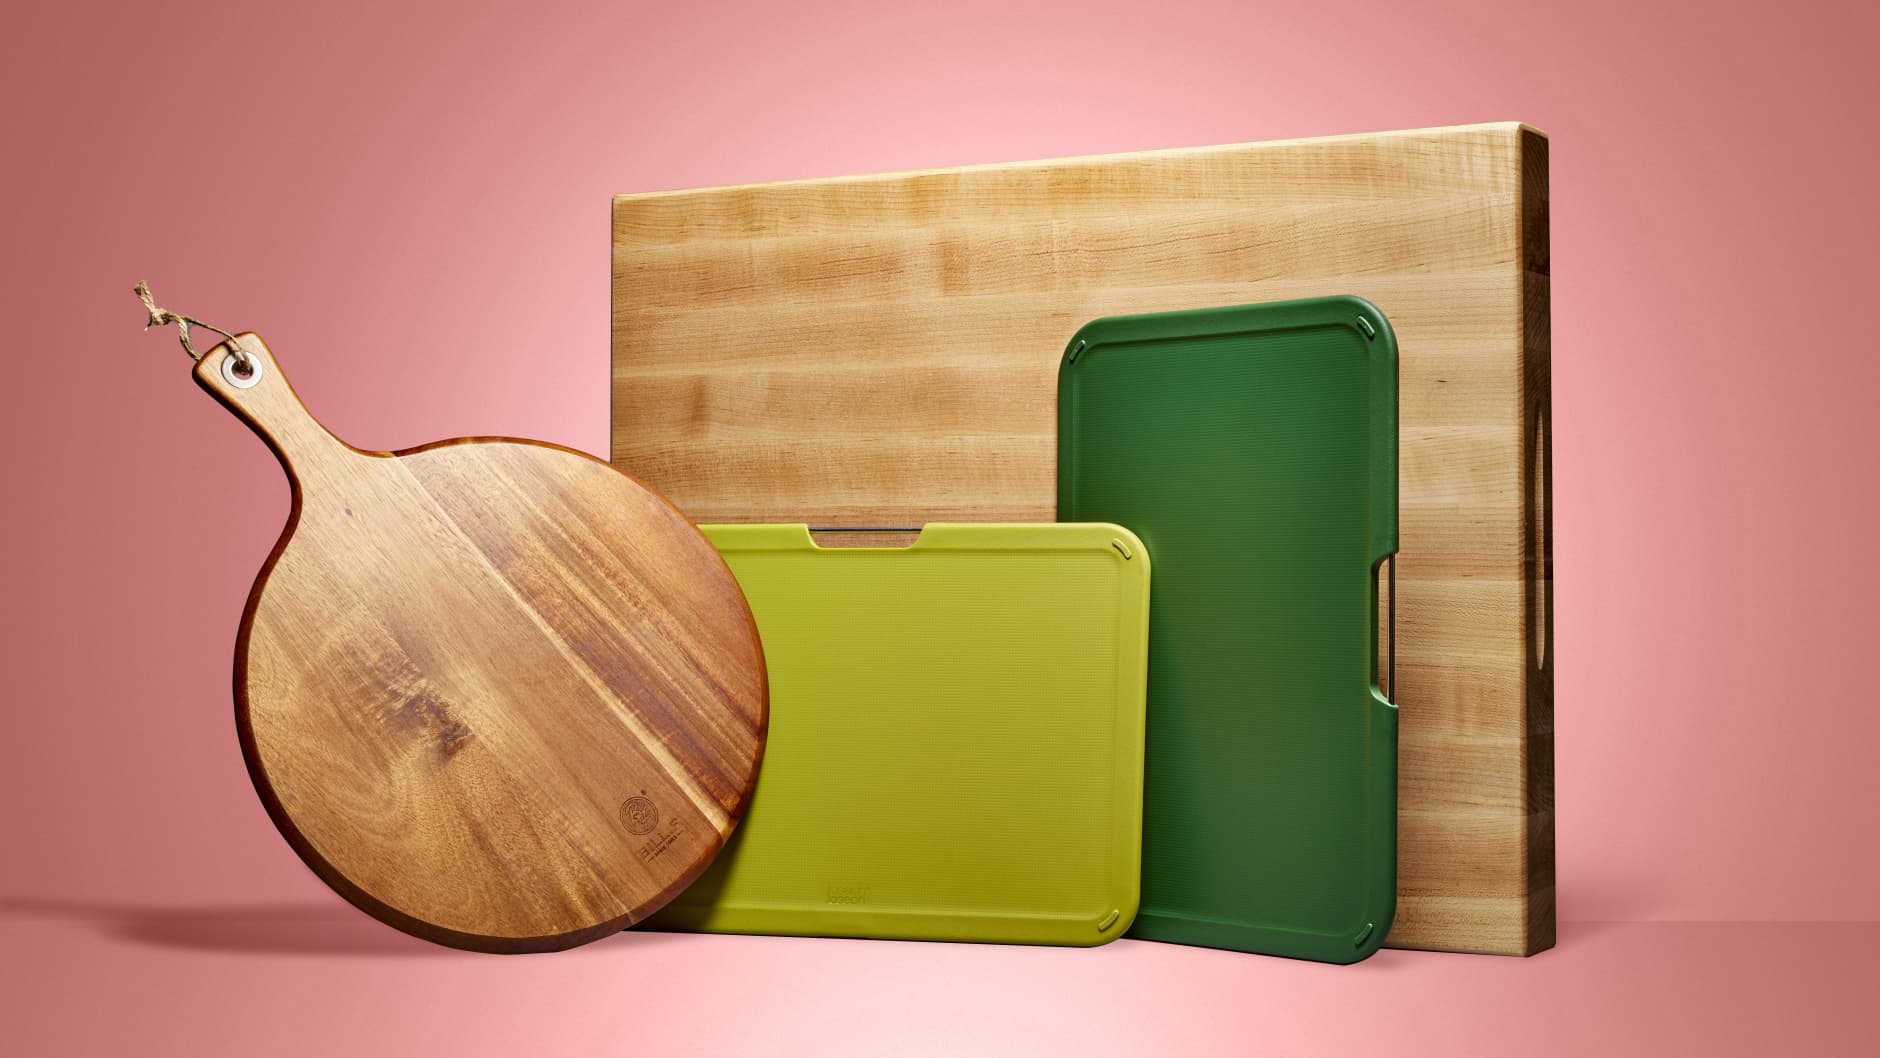 The 10 Best Cutting Boards for Cooking, Camping and Entertaining Buy